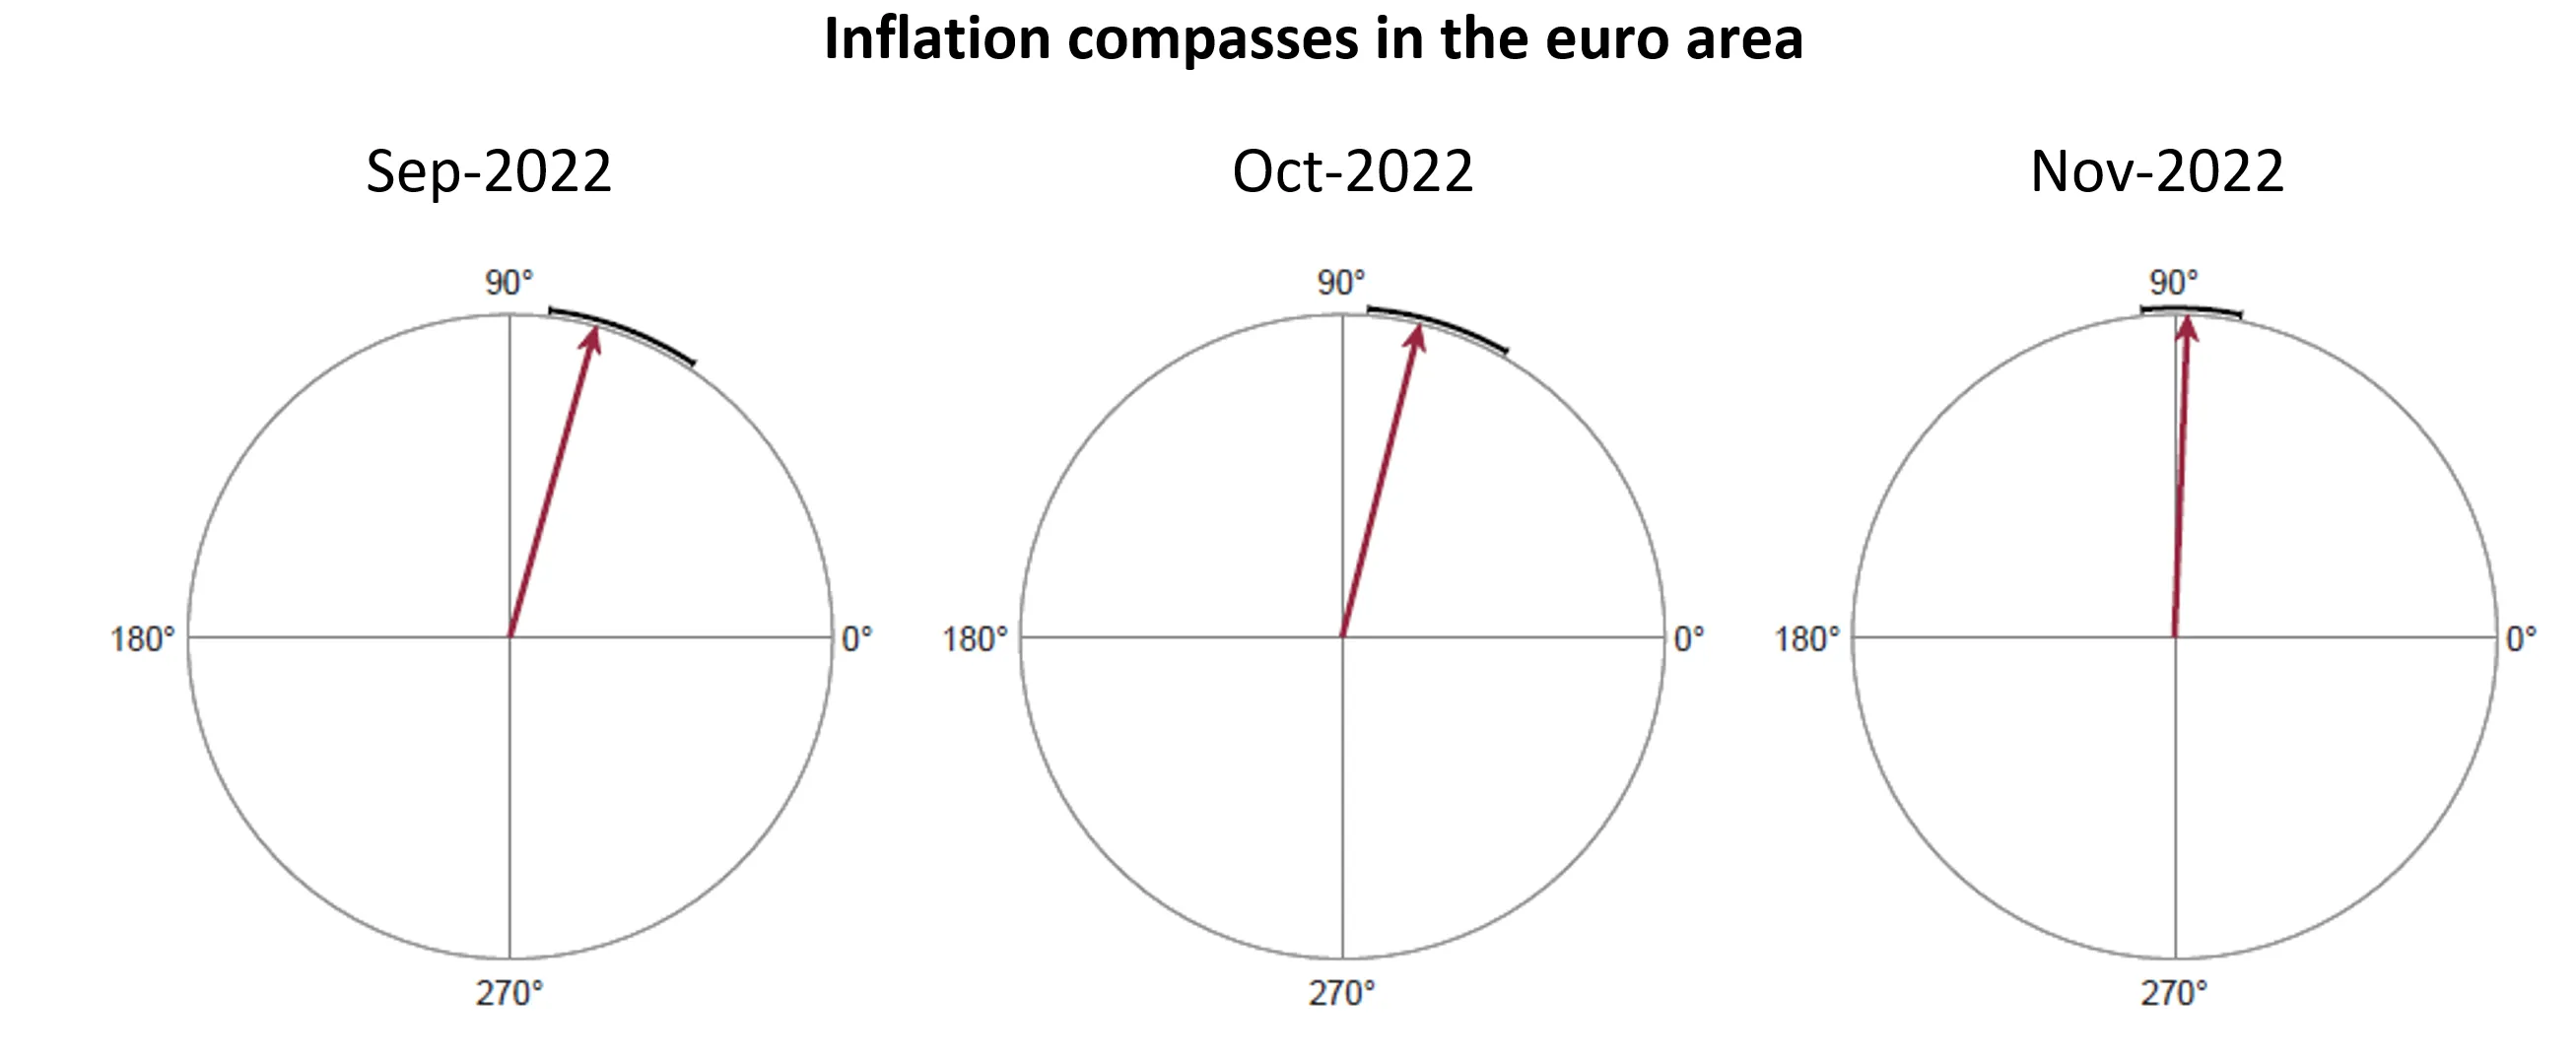 Economics in a picture: Underlying inflation pressures in the euro area reached their peak in the autumn of 2022